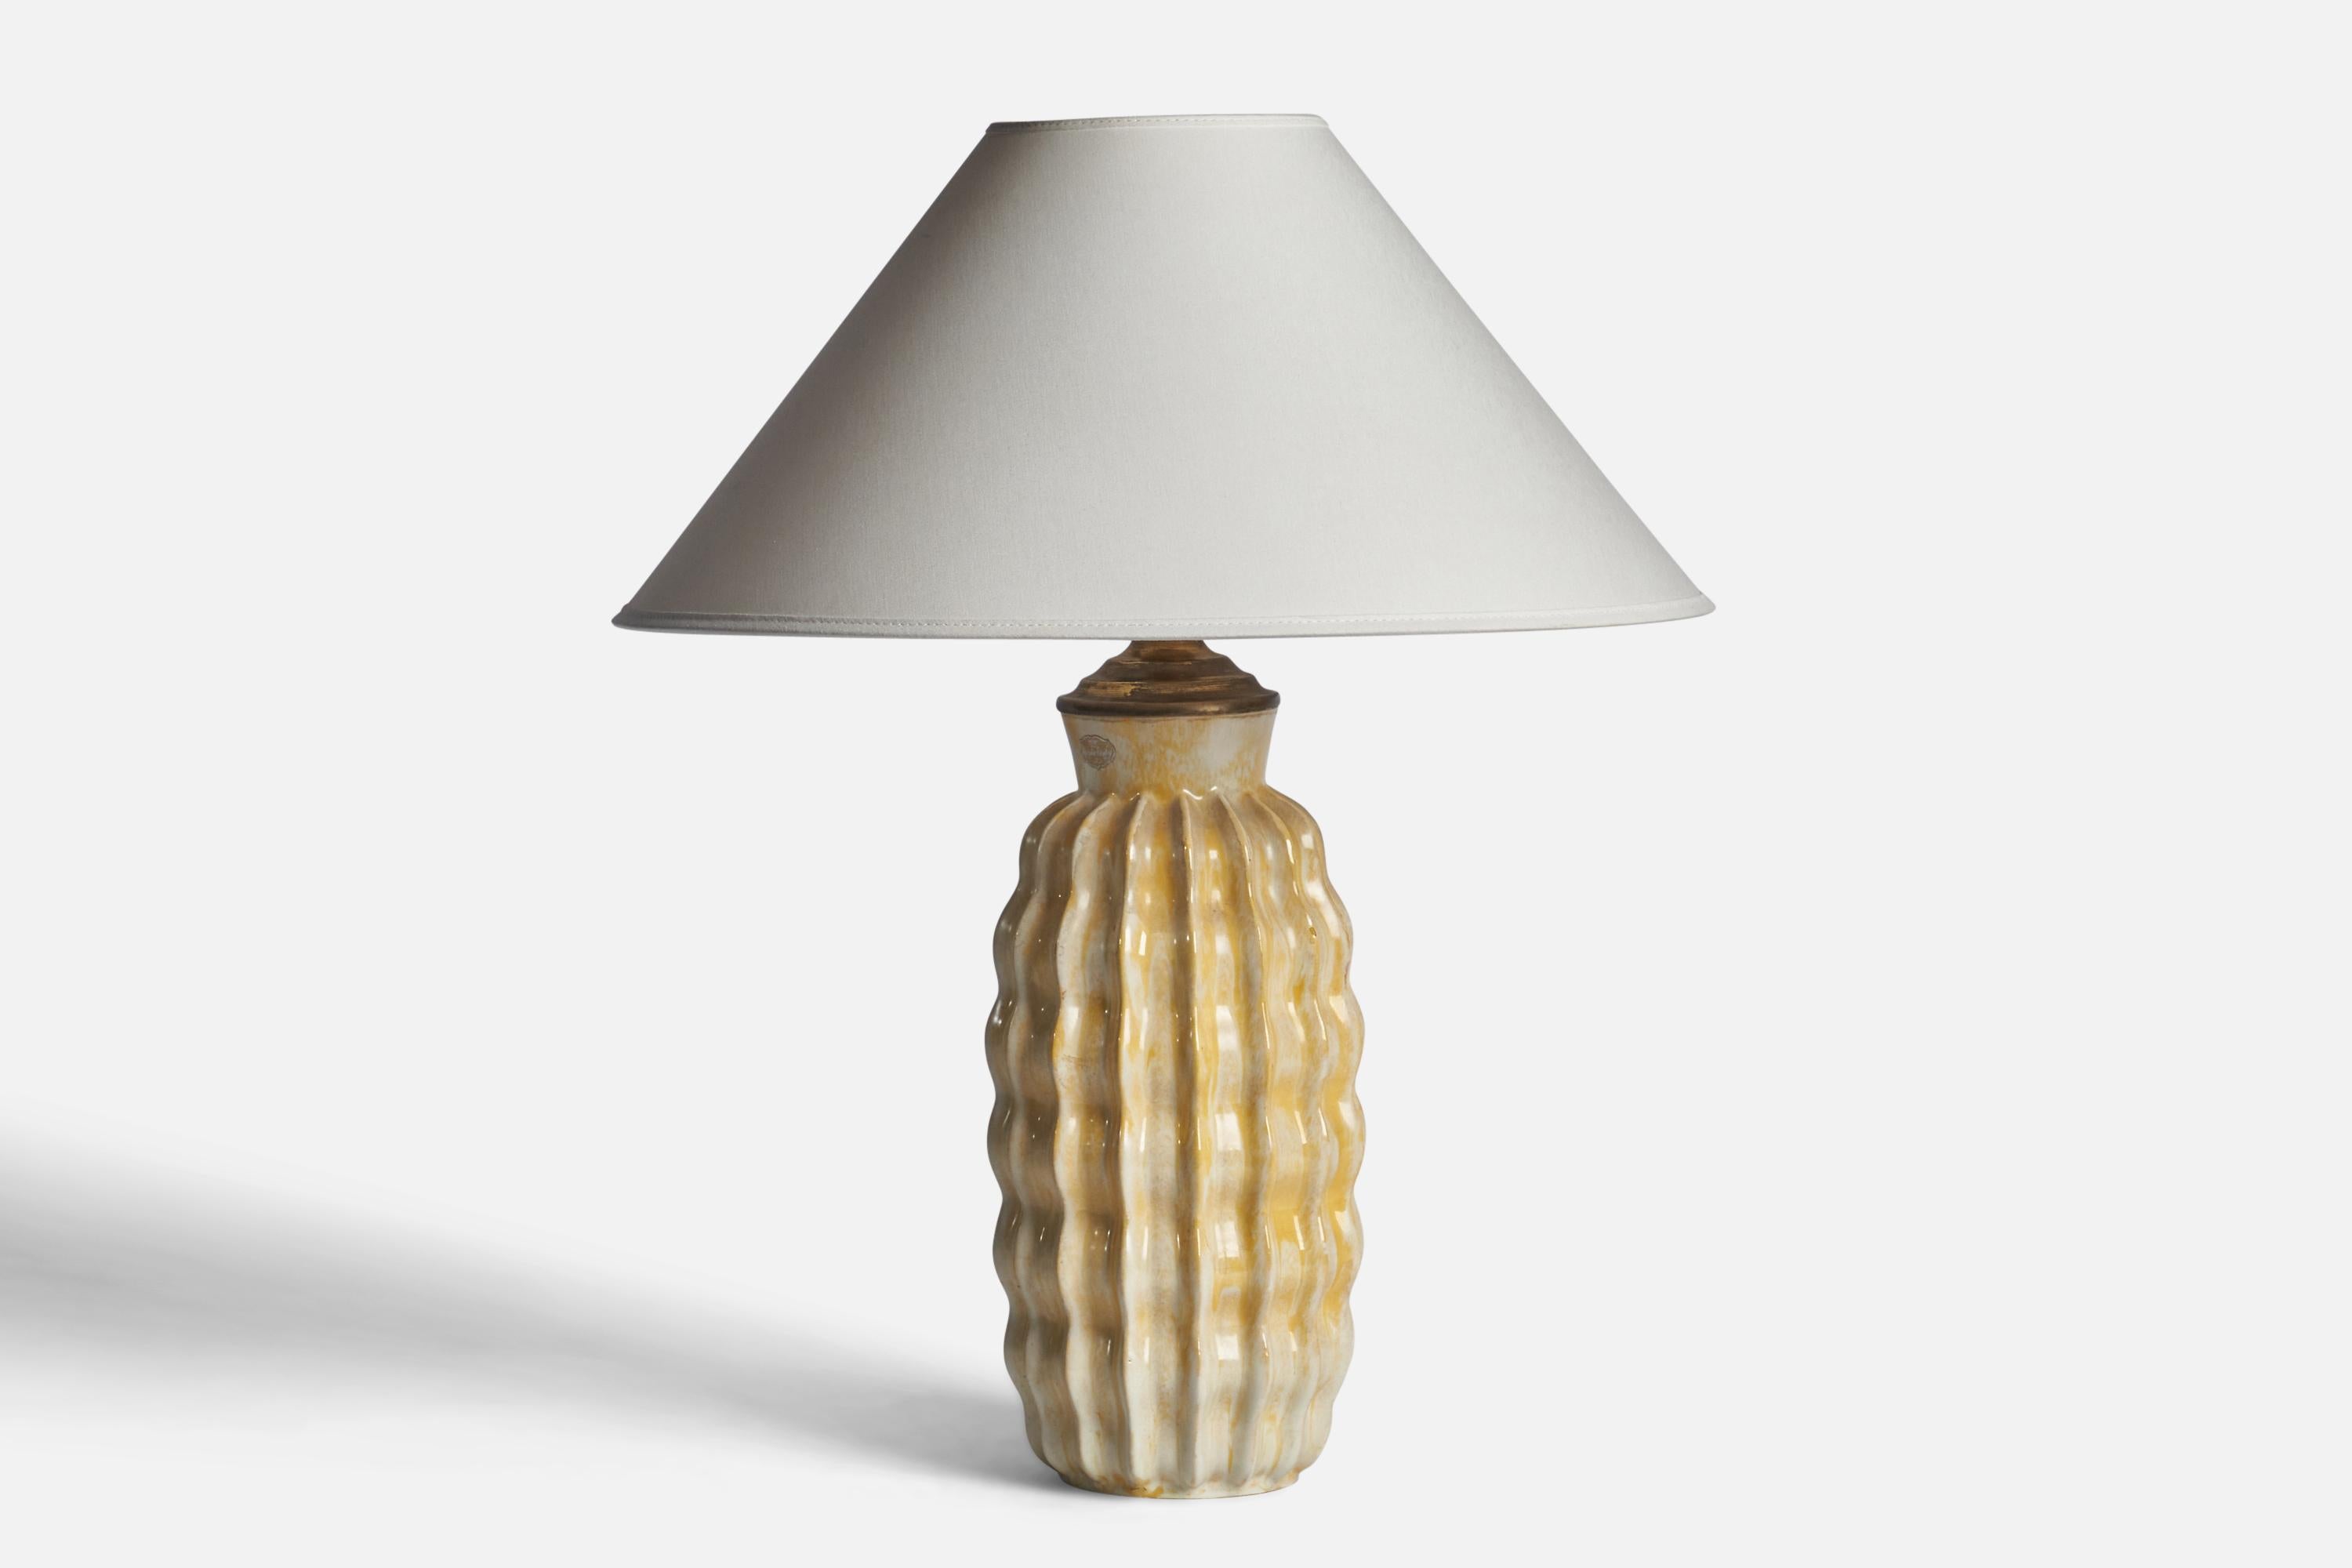 A yellow-glazed fluted table lamp designed by Anna-Lisa Thomson and produced by Upsala Ekeby, Sweden, 1930s

Dimensions of Lamp (inches): 15.65 H x 5.5” Diameter
Dimensions of Shade (inches): 4.5” Top Diameter x 16” Bottom Diameter x 7.25”